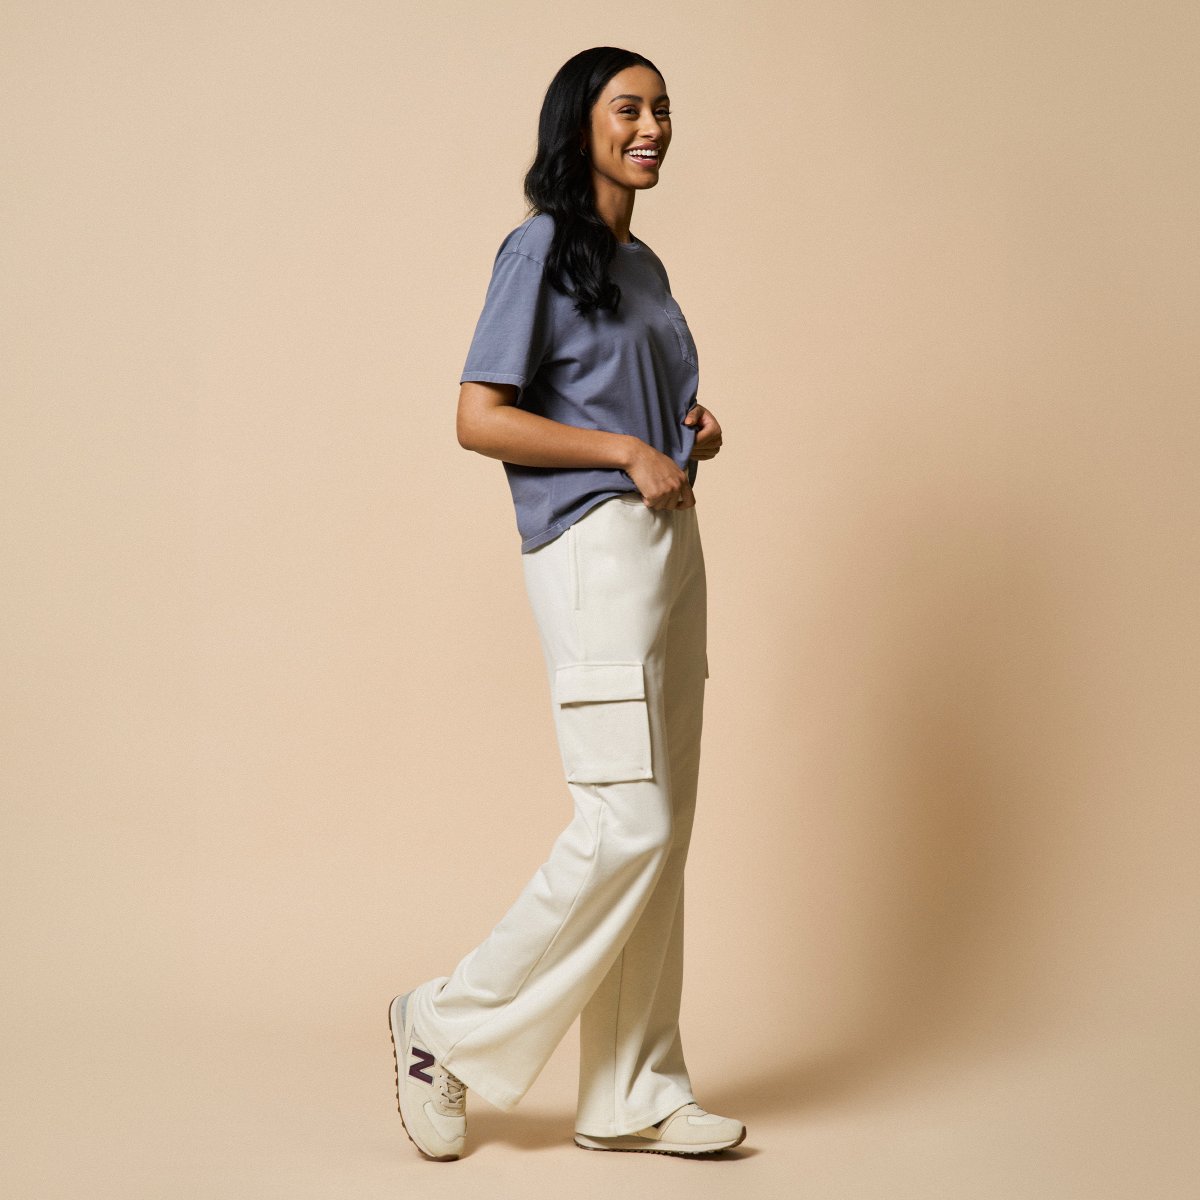 Cute, comfortable, and functional - what more could a girl want? You can have it all in our Wide Leg Cargo Sweatpants

Model Height: 6'0'
Top: ST
Bottom: ST
.
.
.
#americantall #wethetall #tallwomen #tallgirl #tallstyle #tallclothing #tallfashion #womenstyle #ootd